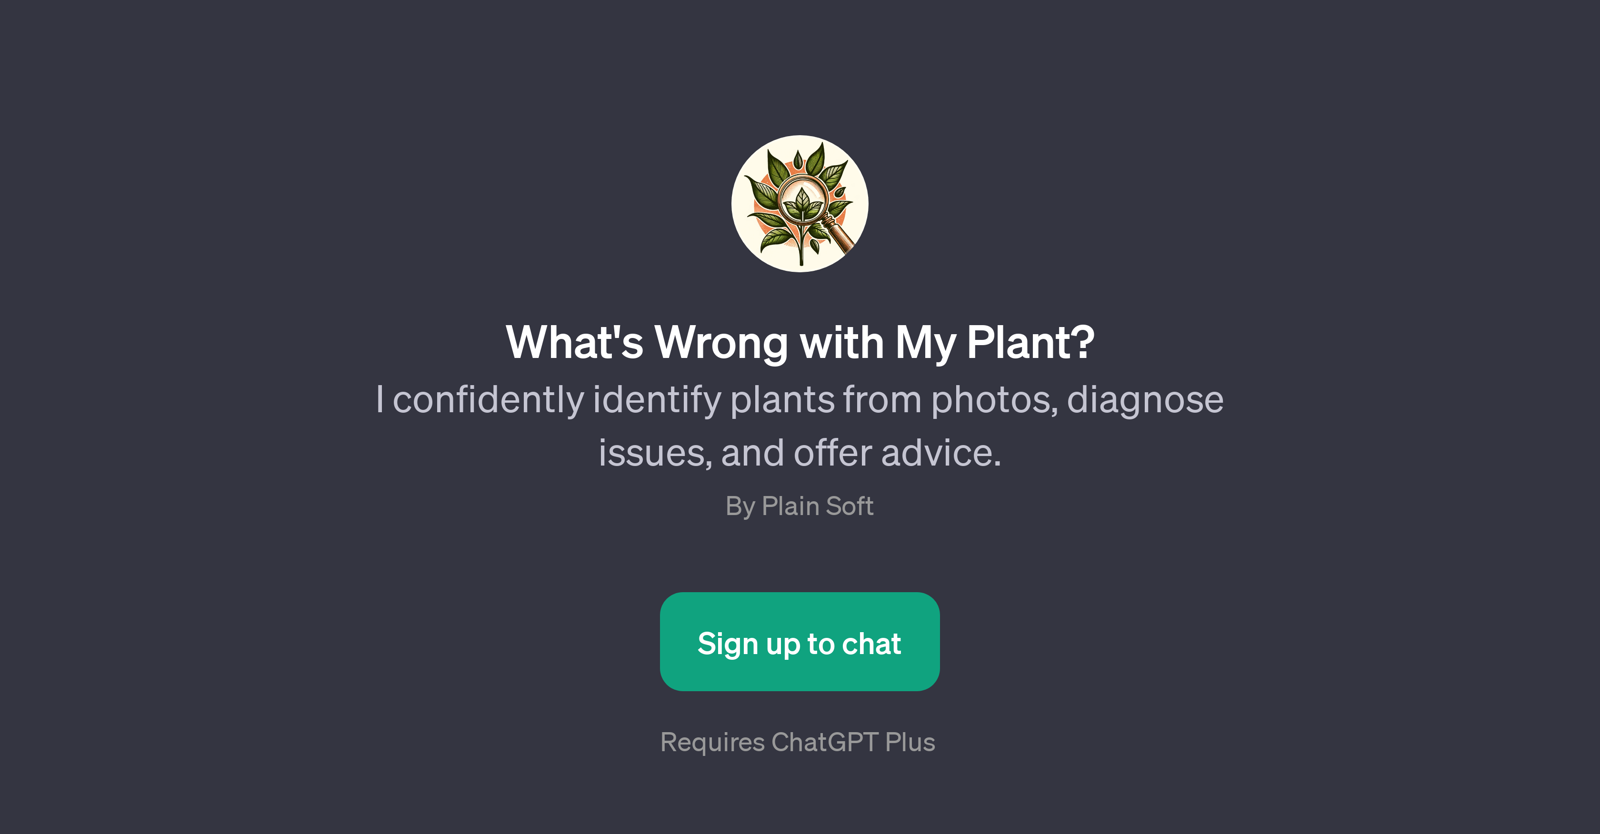 What's Wrong with My Plant website